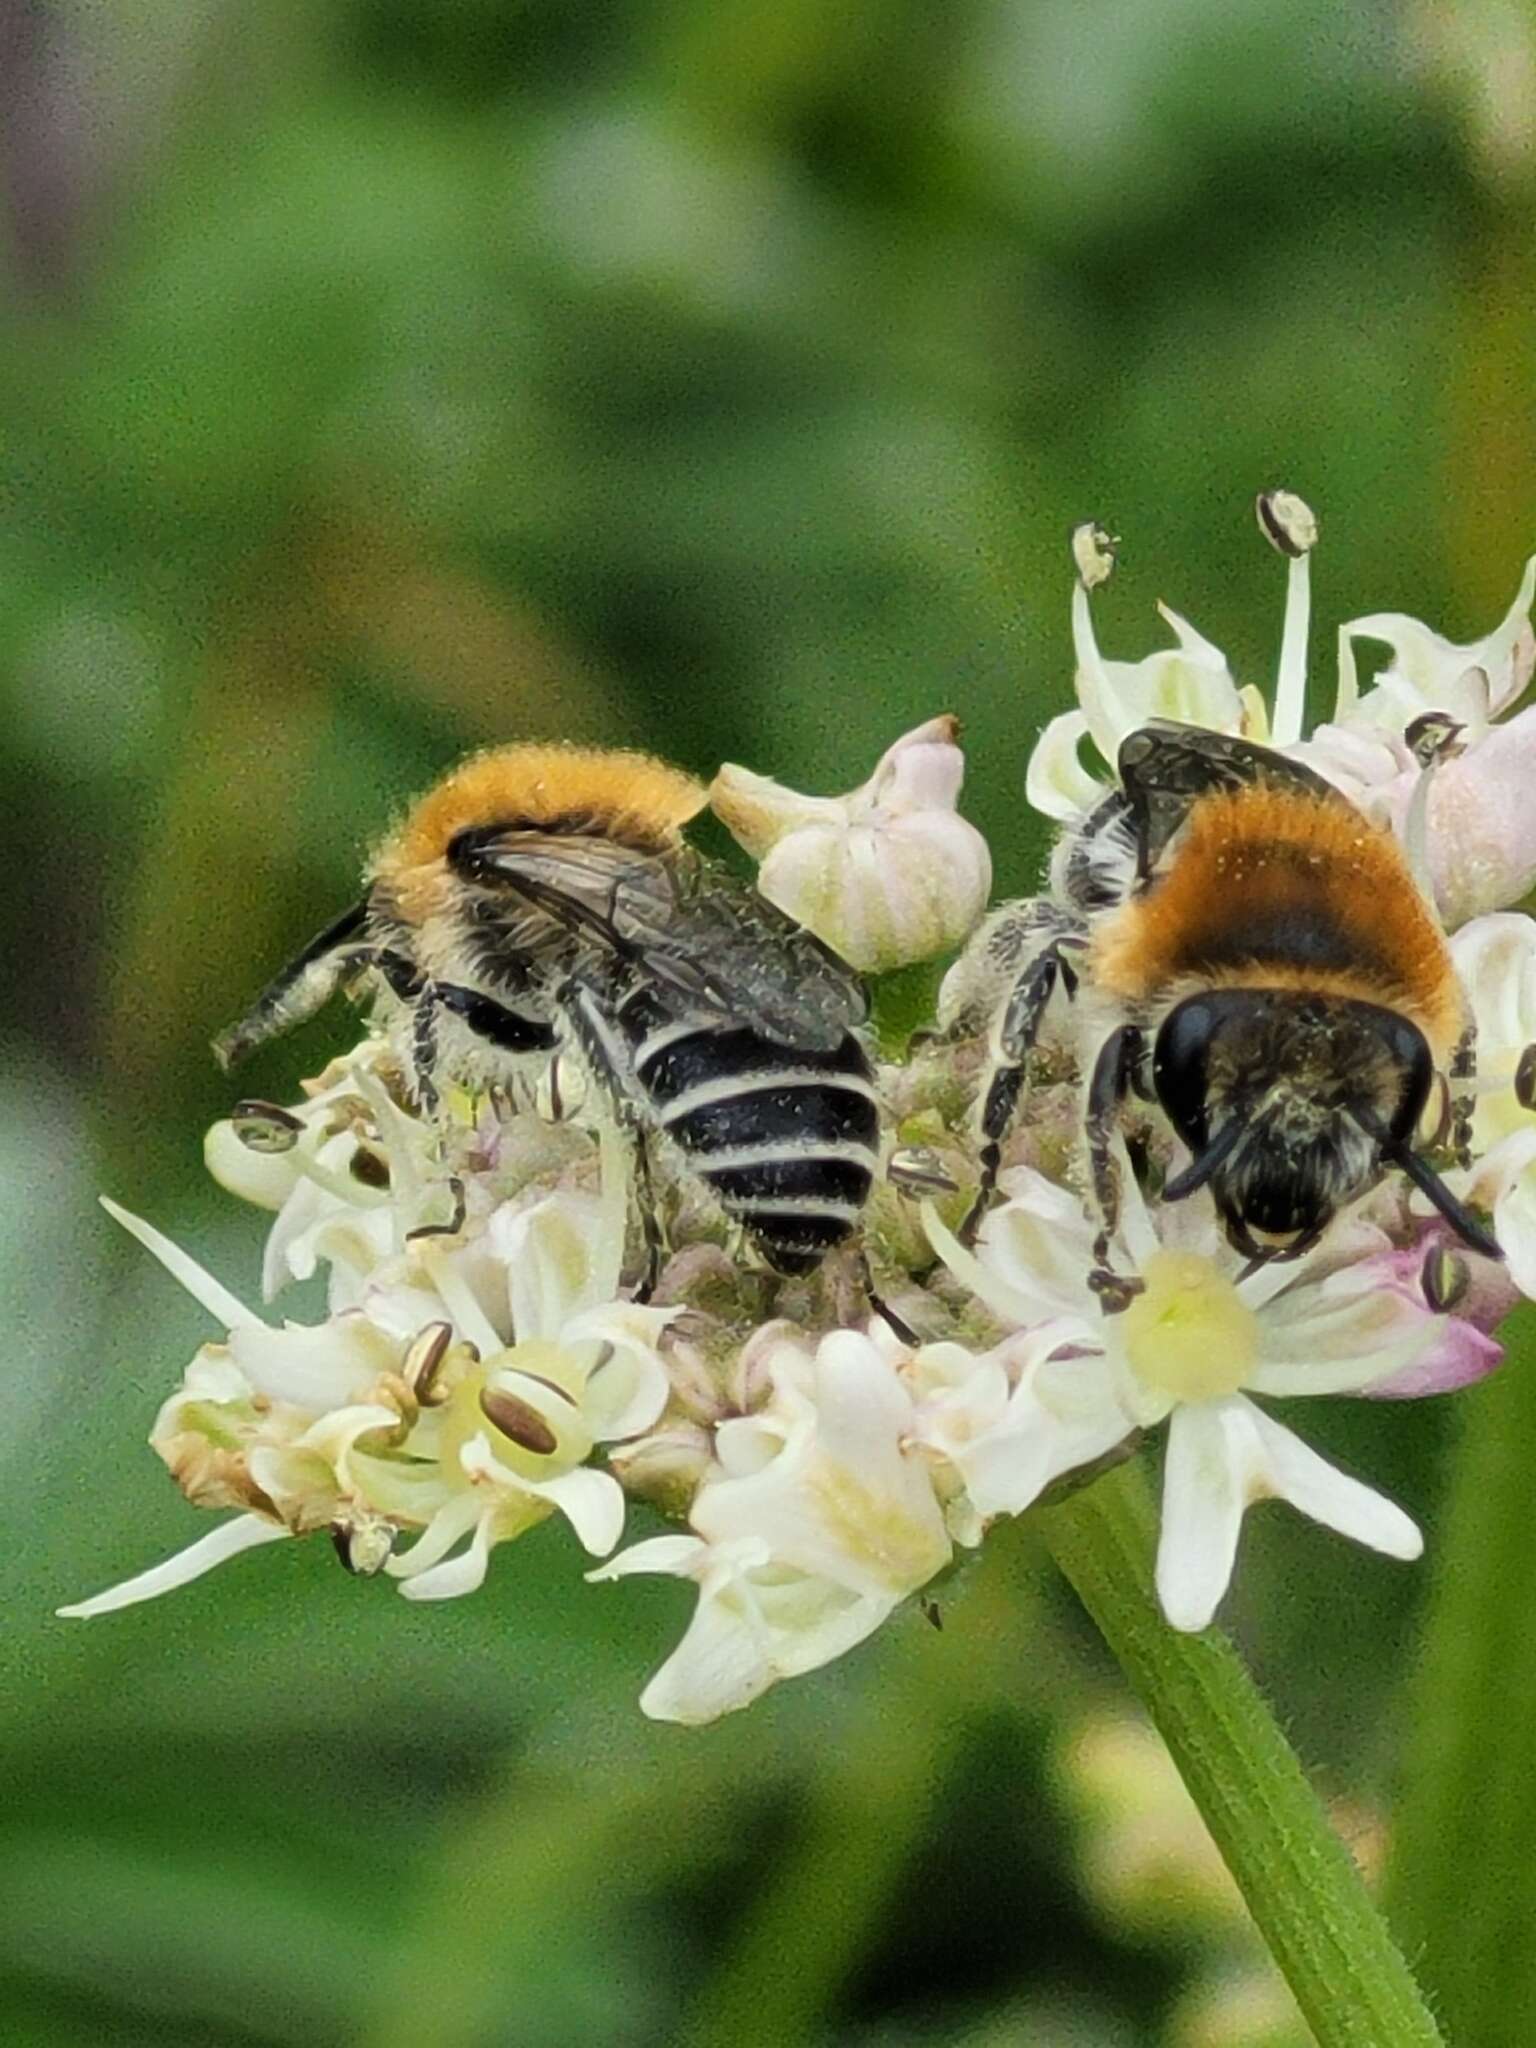 Image of Northern colletes